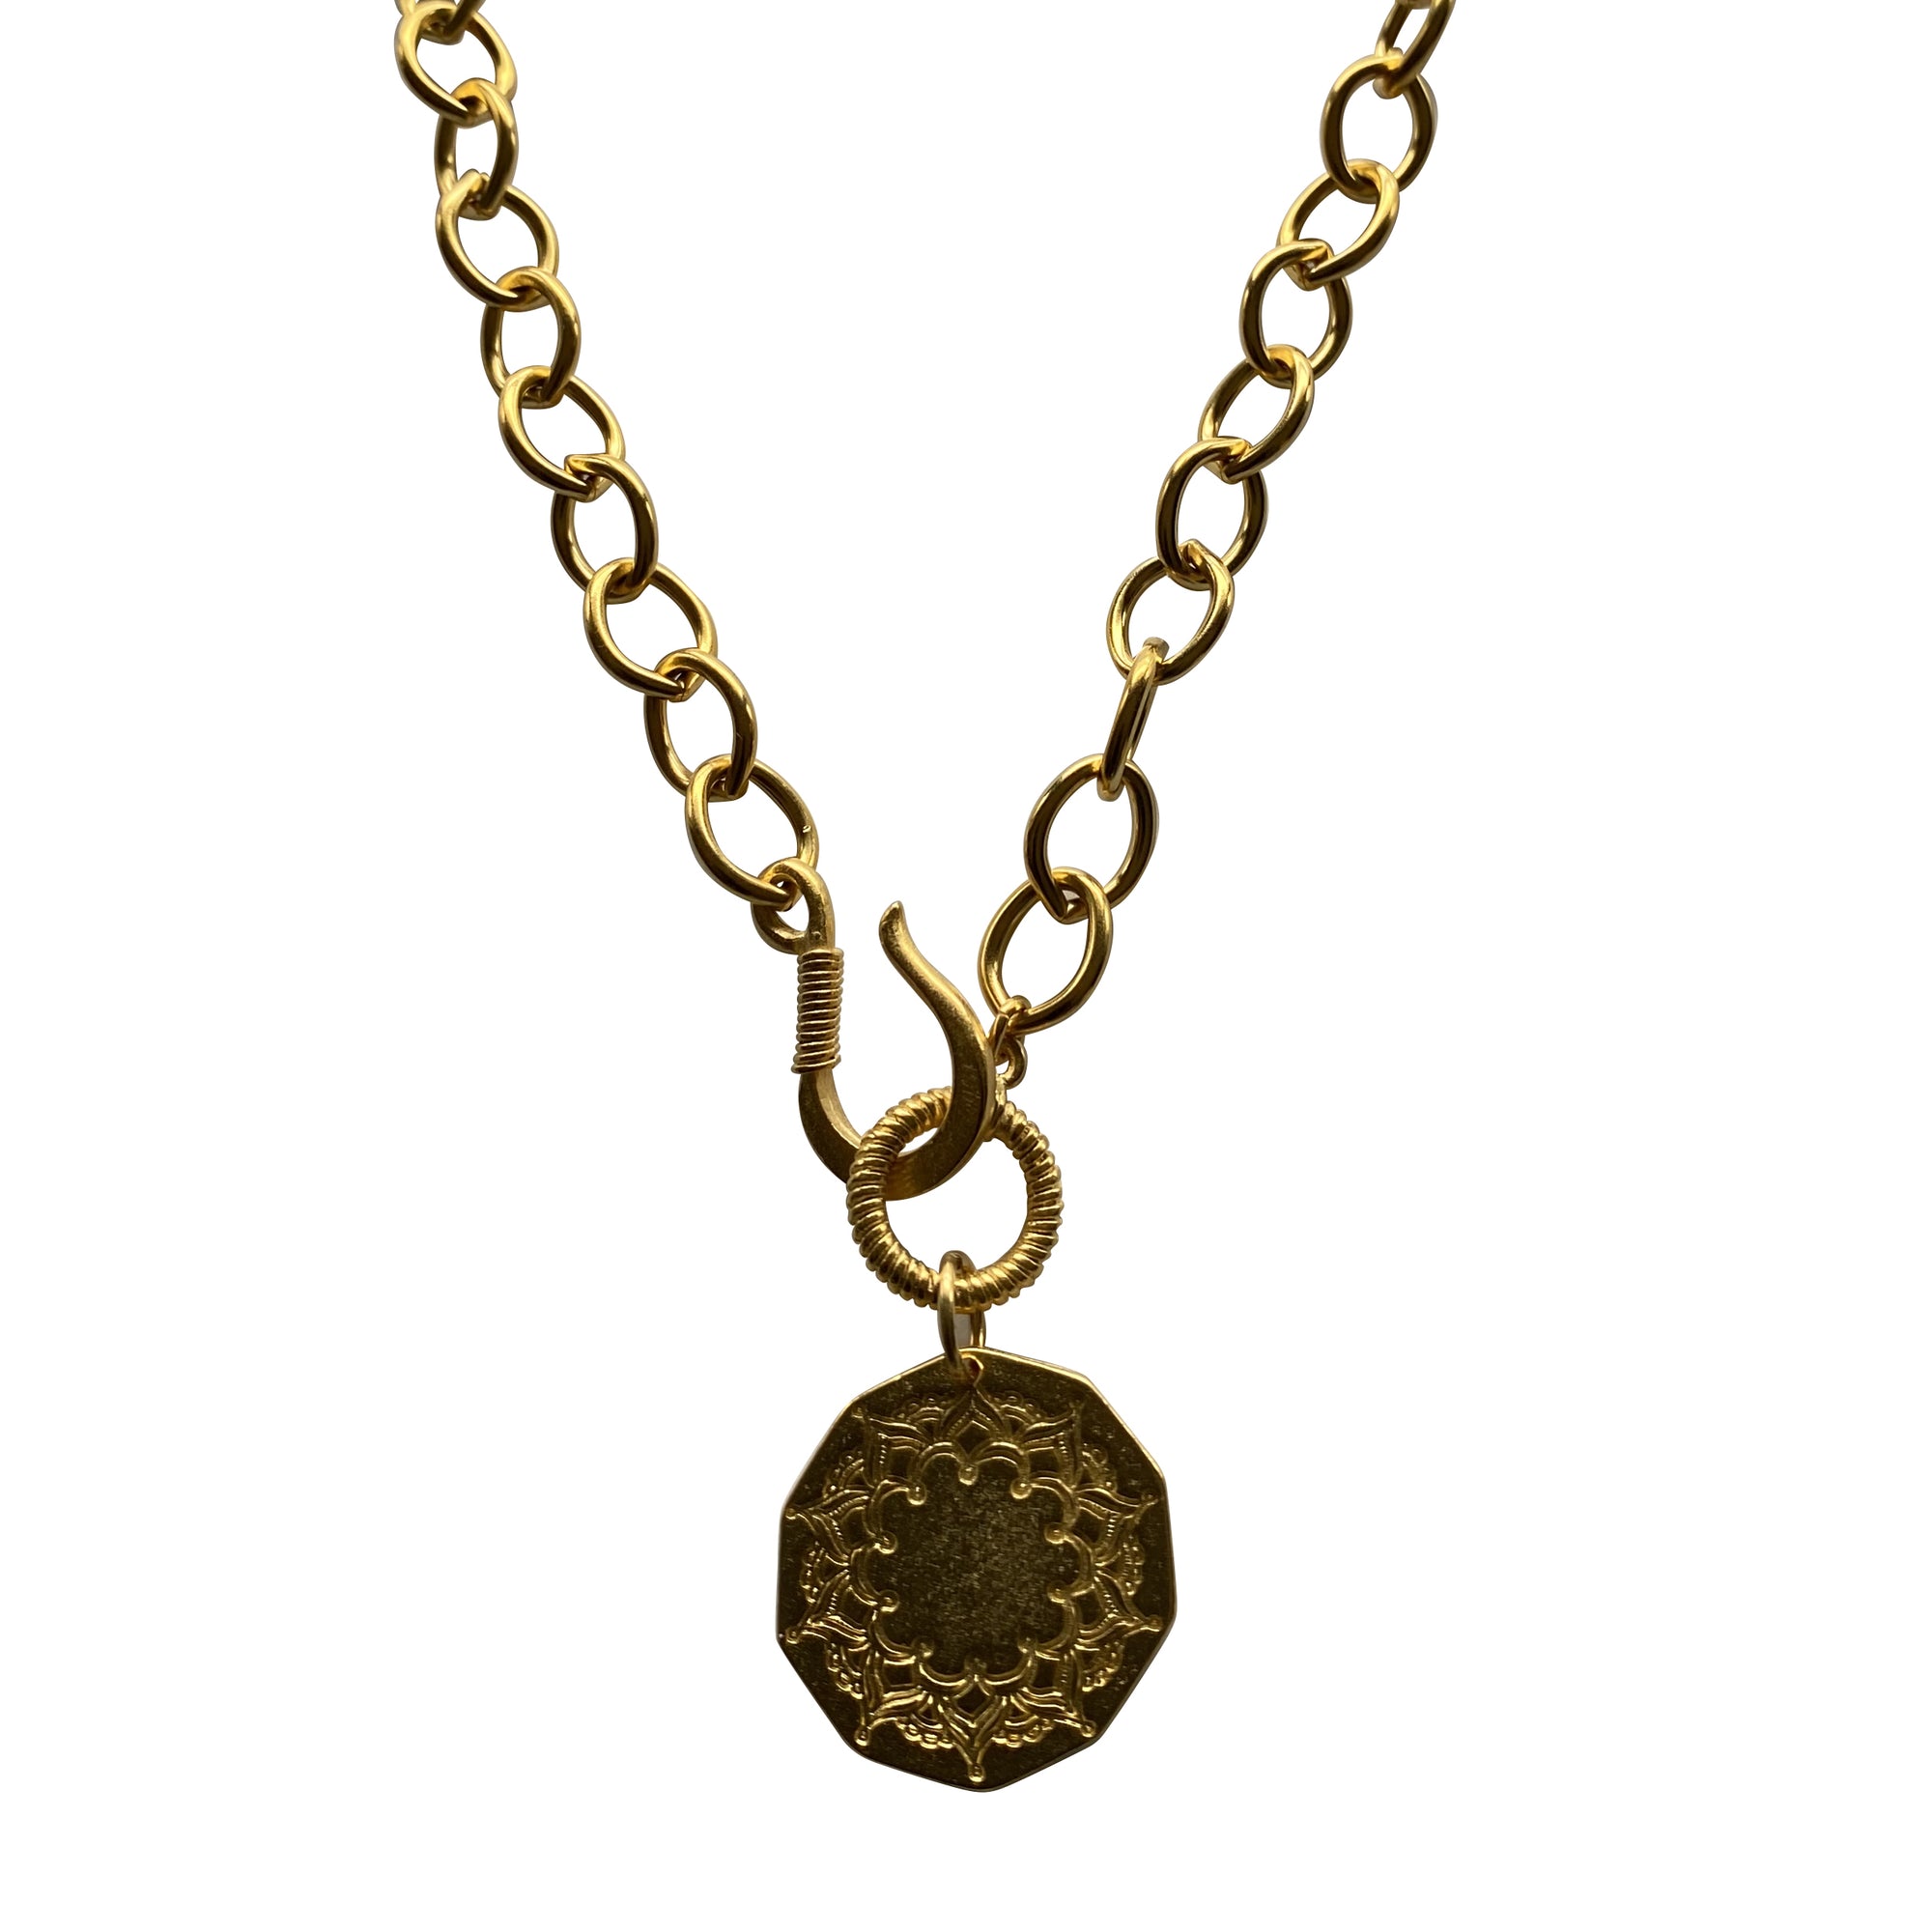 Gold Statement Necklace with Geometric Design Pendant